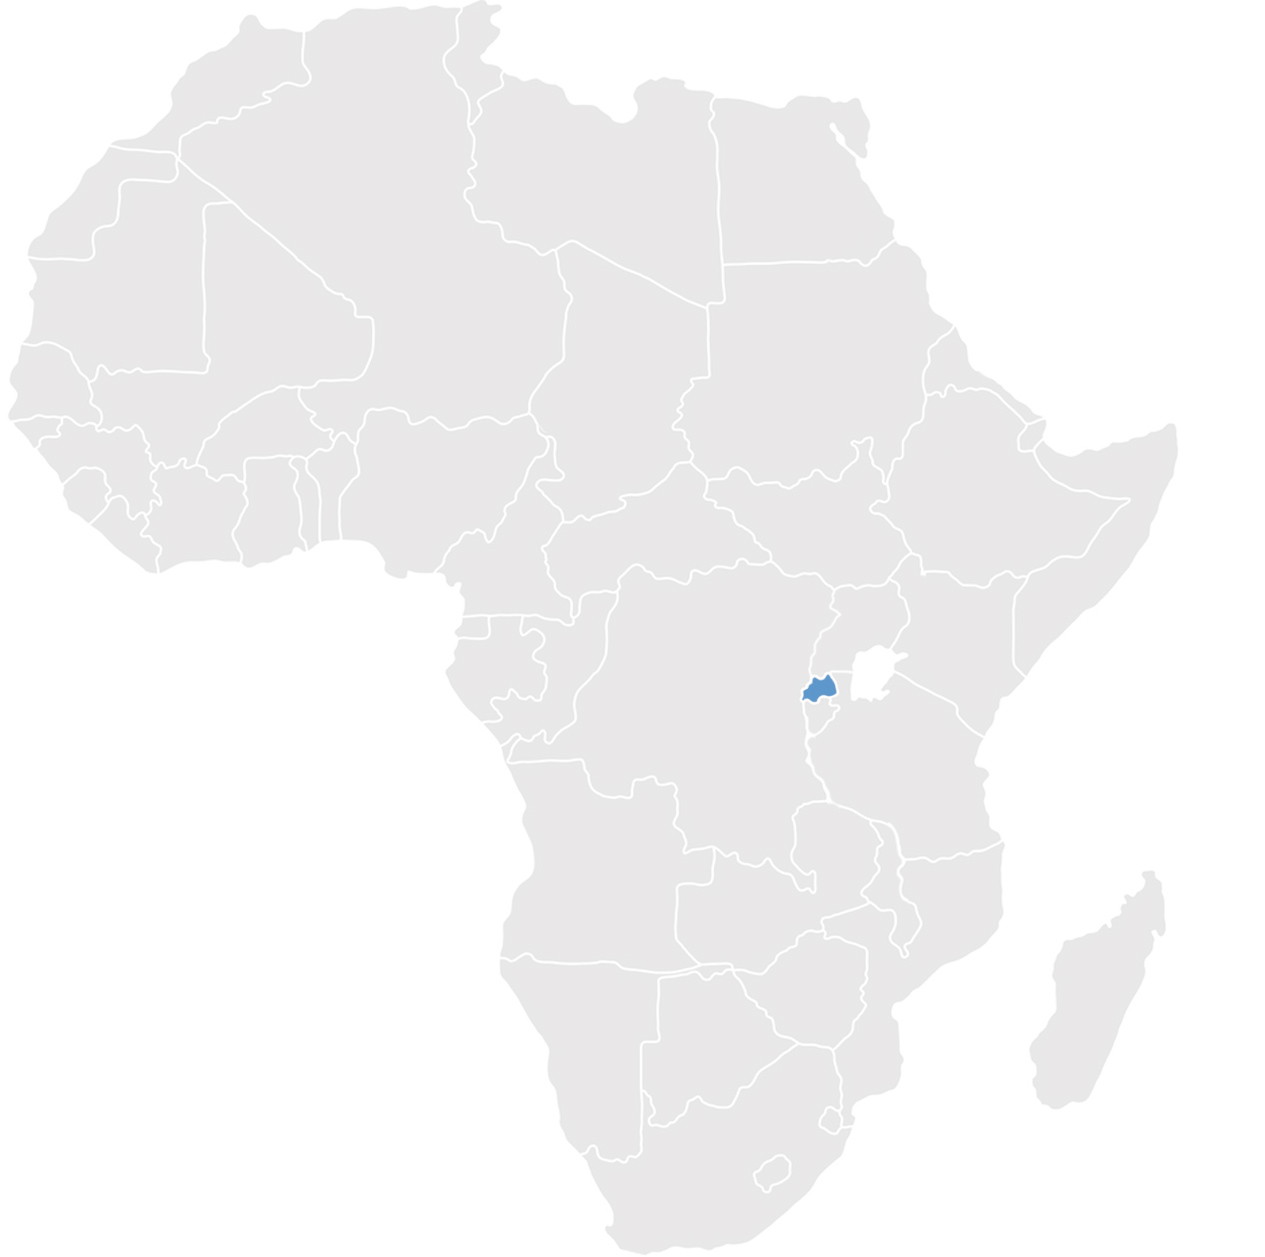 Gray map of Africa with Rwanda in blue